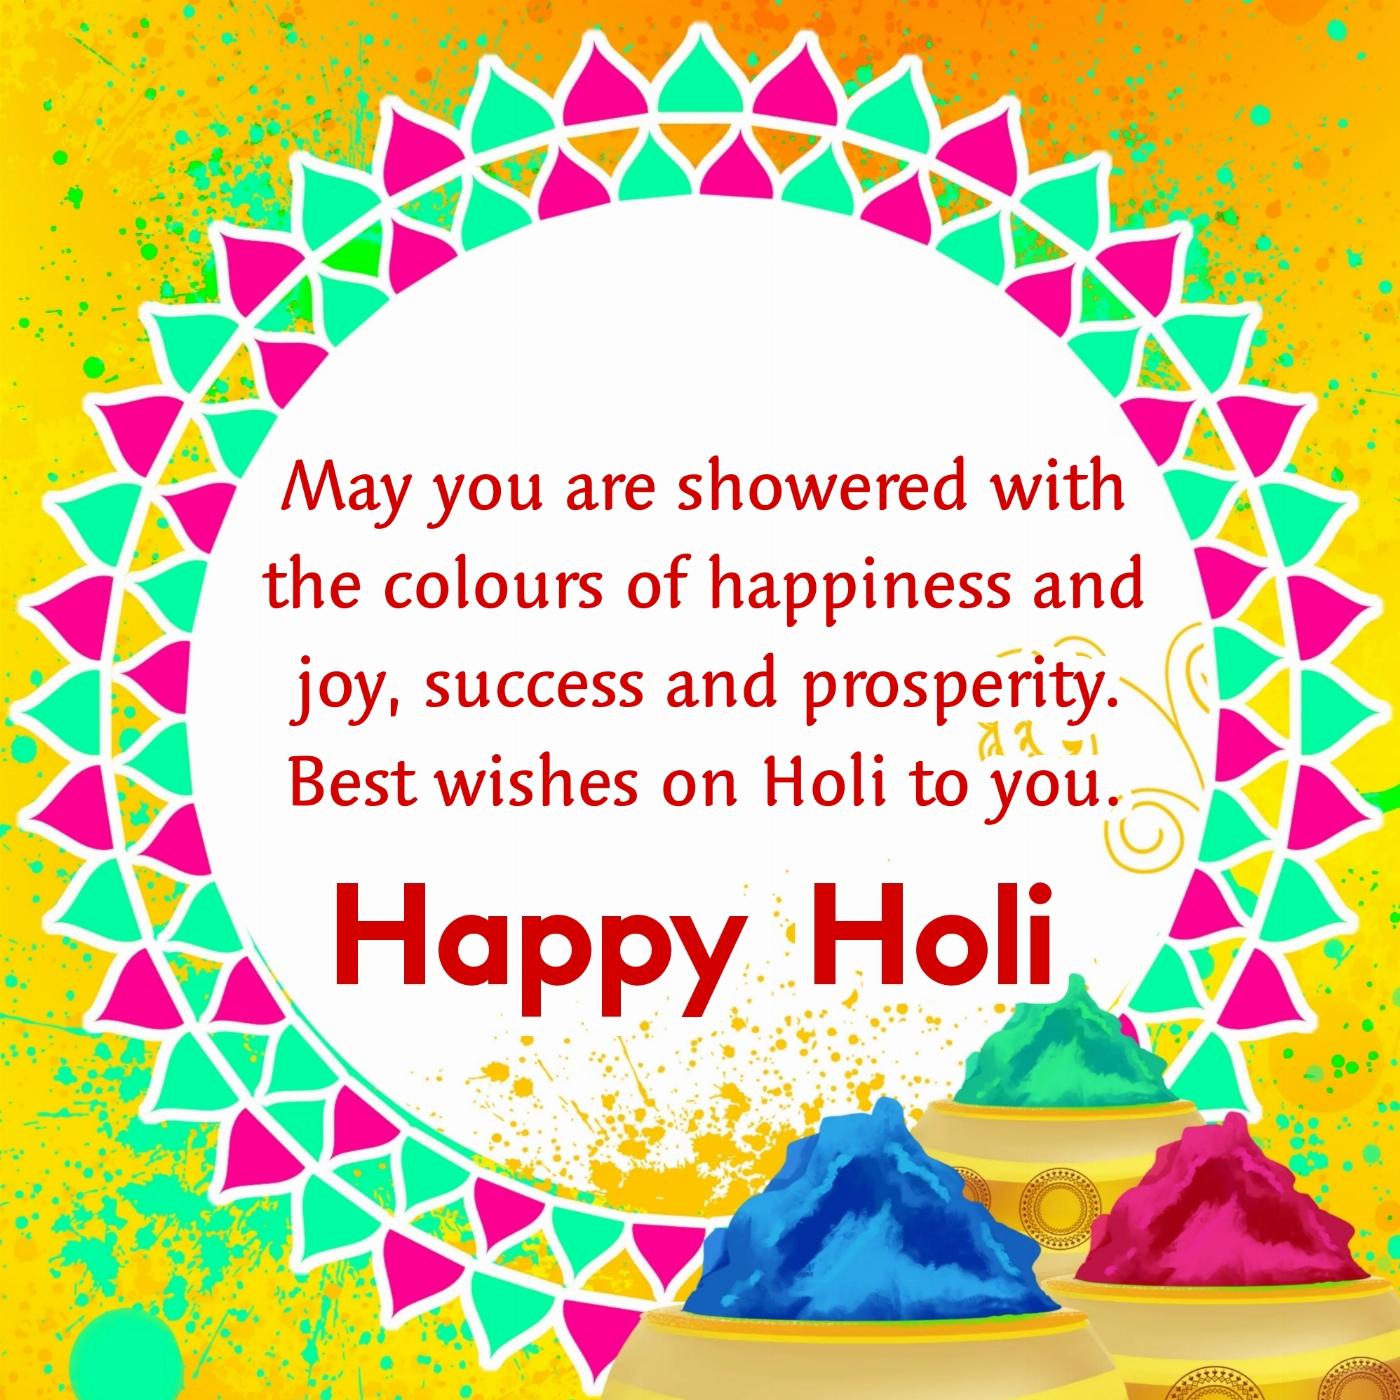 May you are showered with the colours of happiness and joy